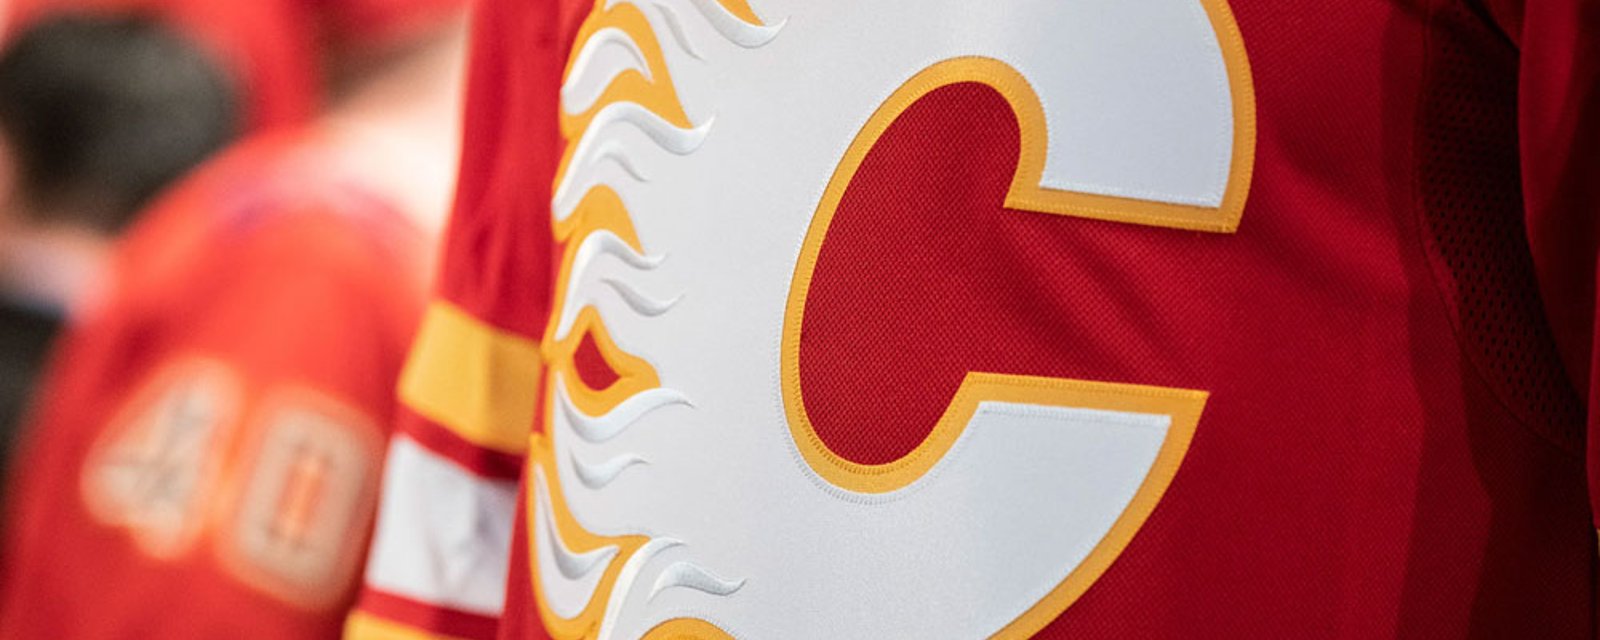 Flames player found guilty, sentenced to one year in prison